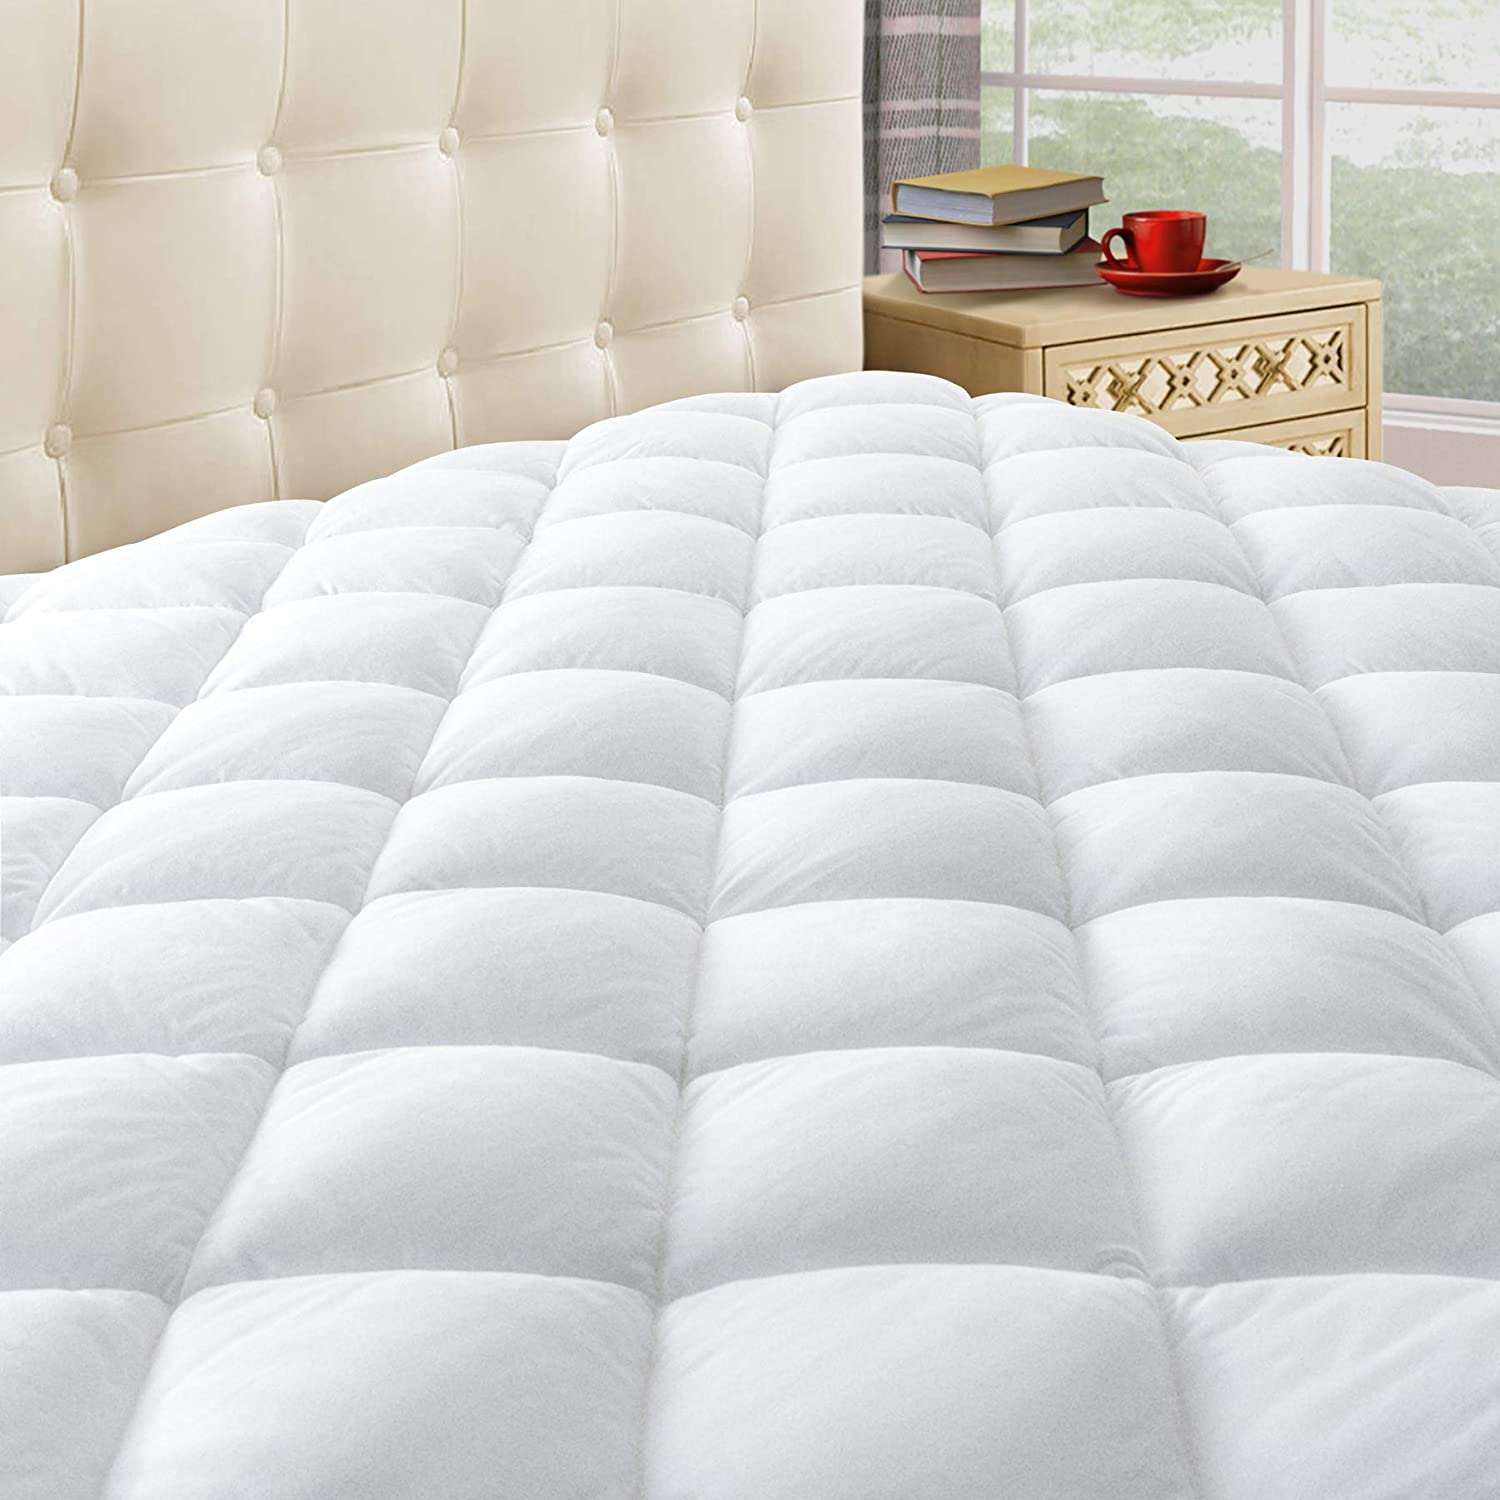 Pillow Top Mattress Cover Full Size Bed Topper Pad Soft Cooling Hypoallergenic